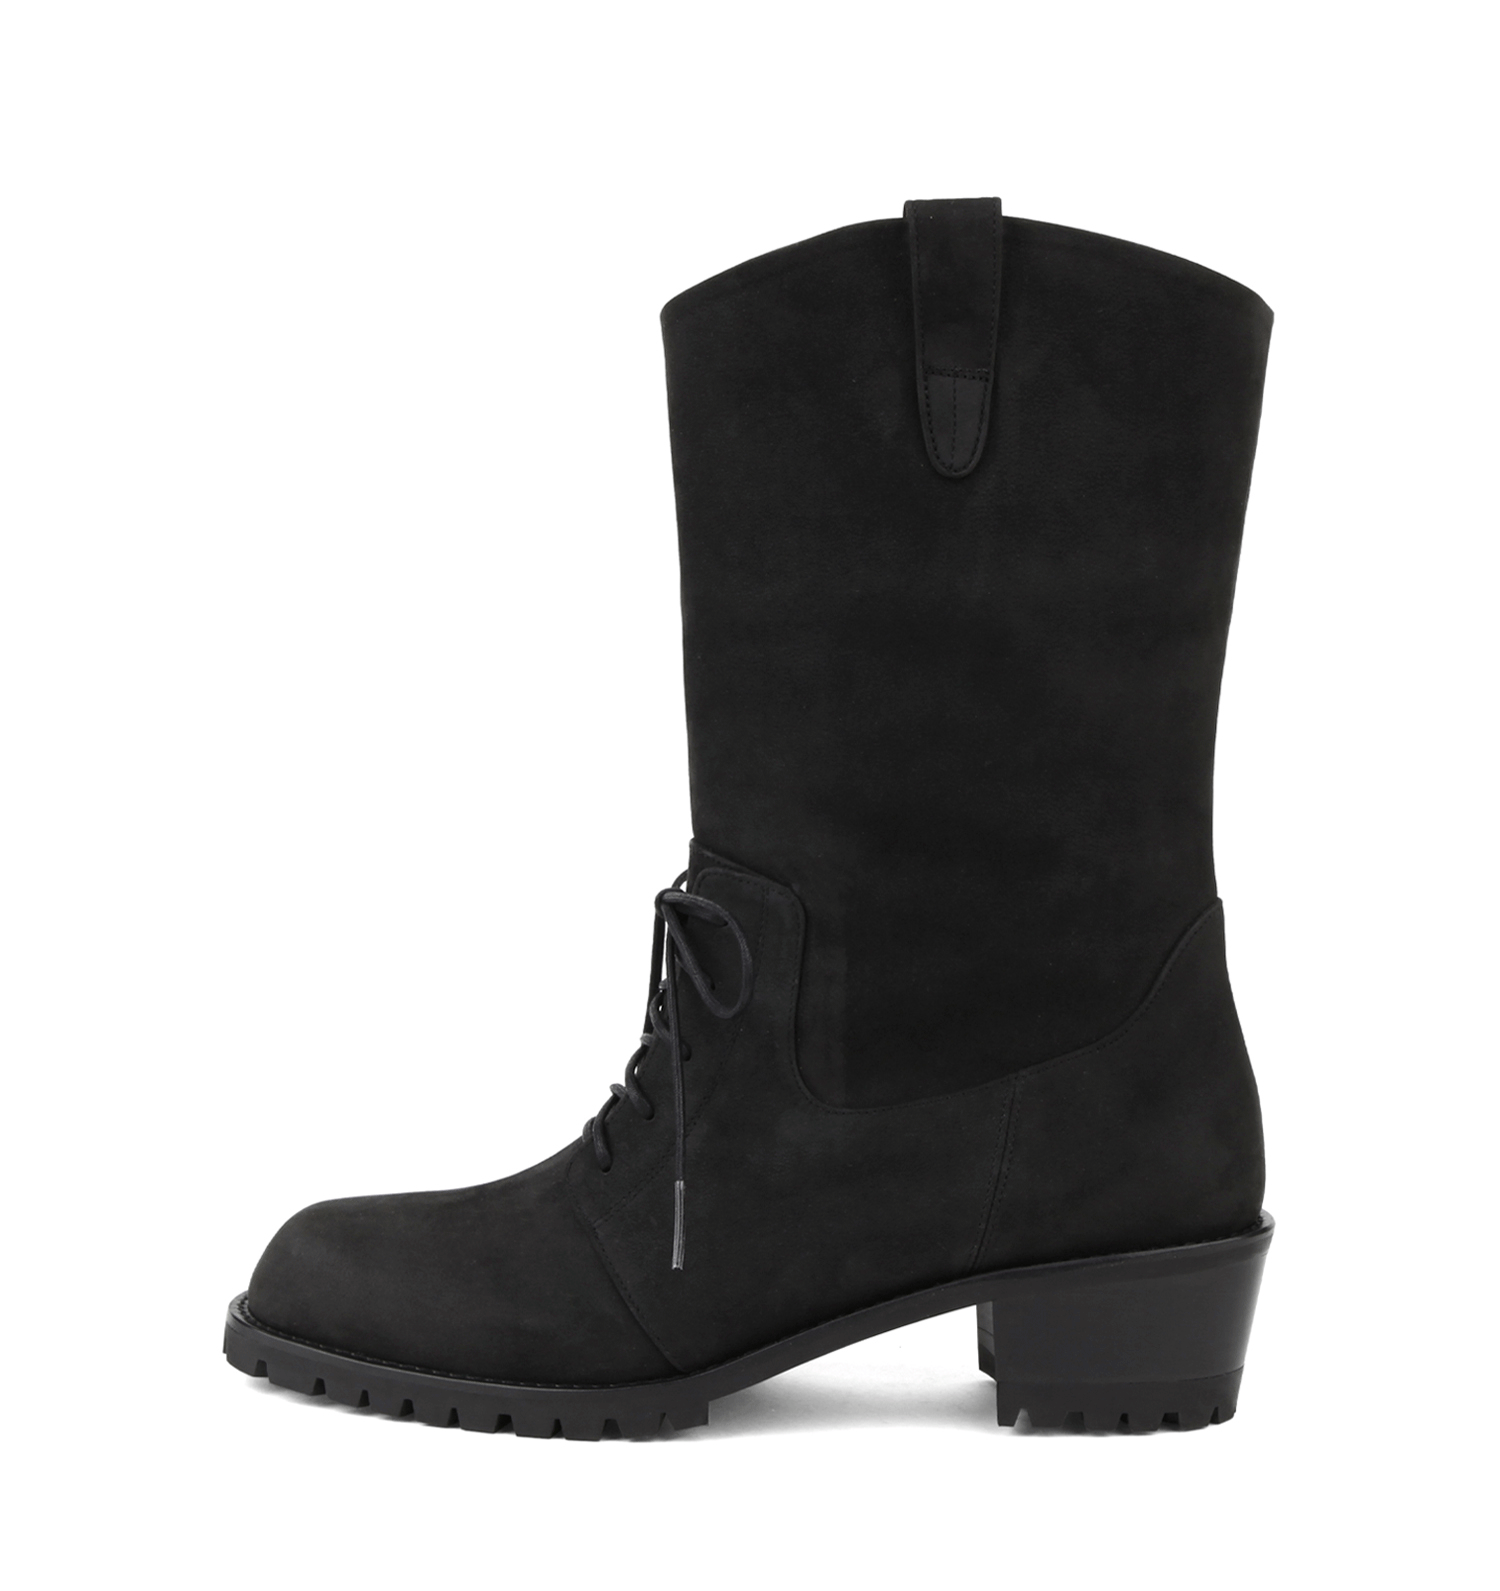 Walk with me Middle Boots - Black